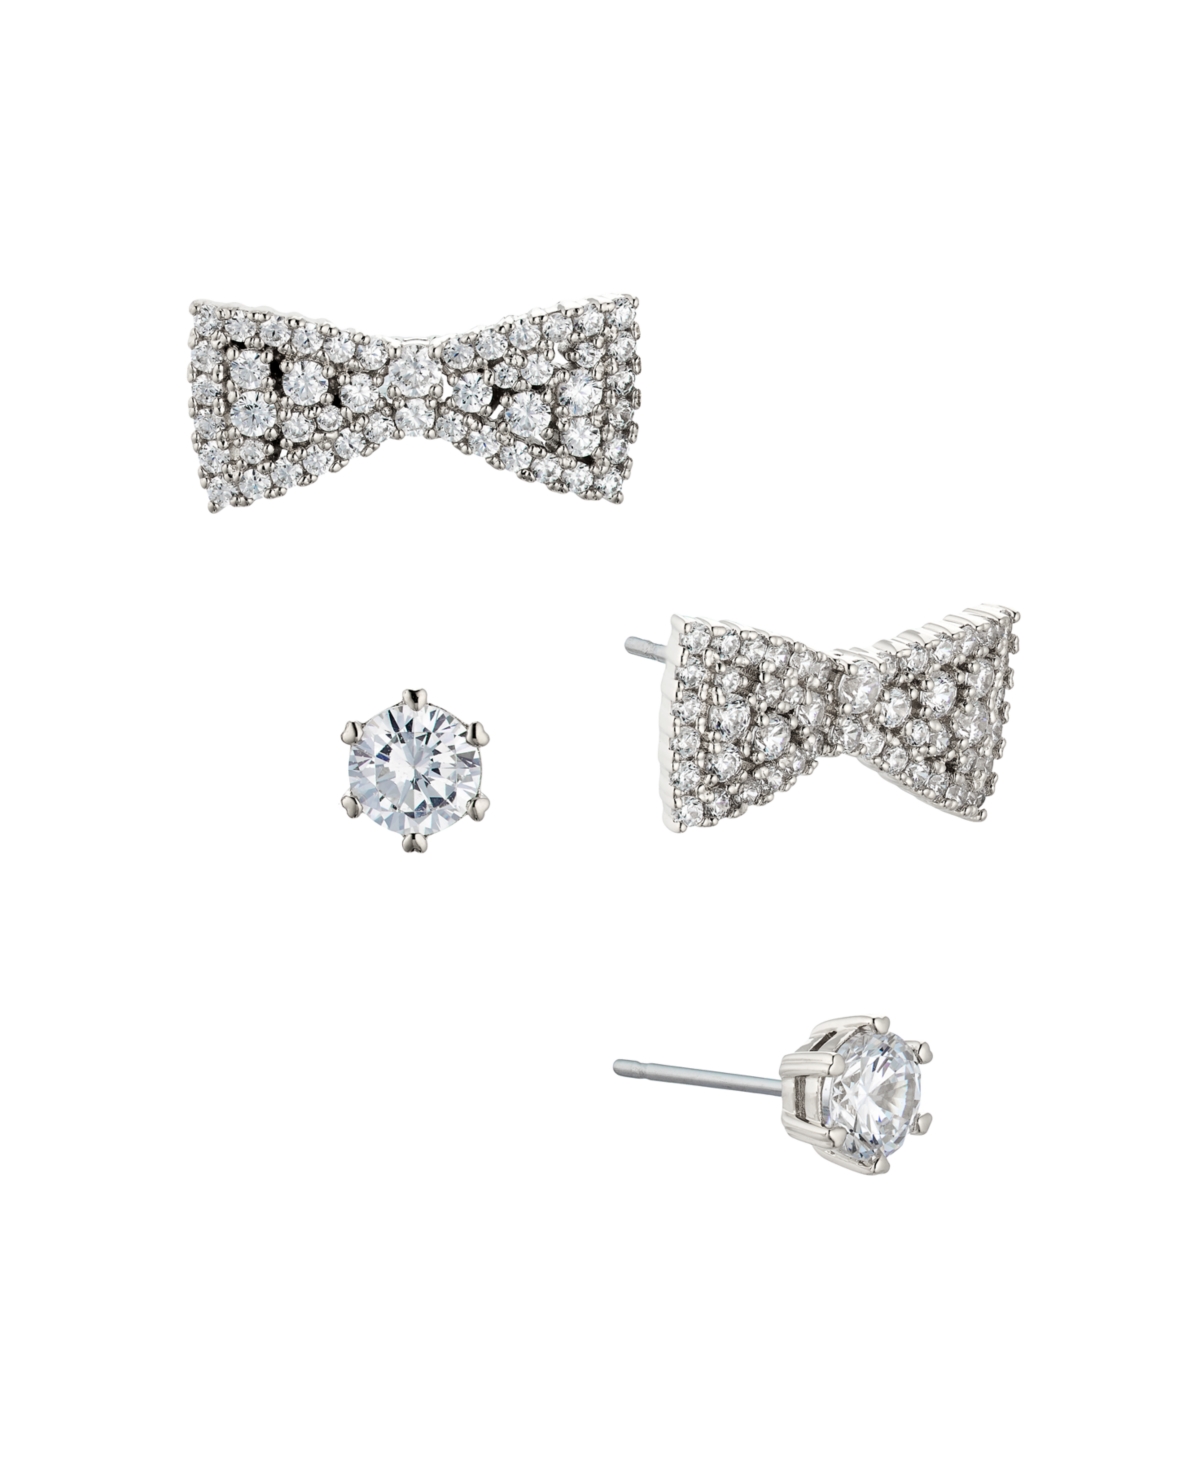 Silver-Tone Cubic Zirconia Bow Earrings and Stud Earrings Set of Two Pair - Silver